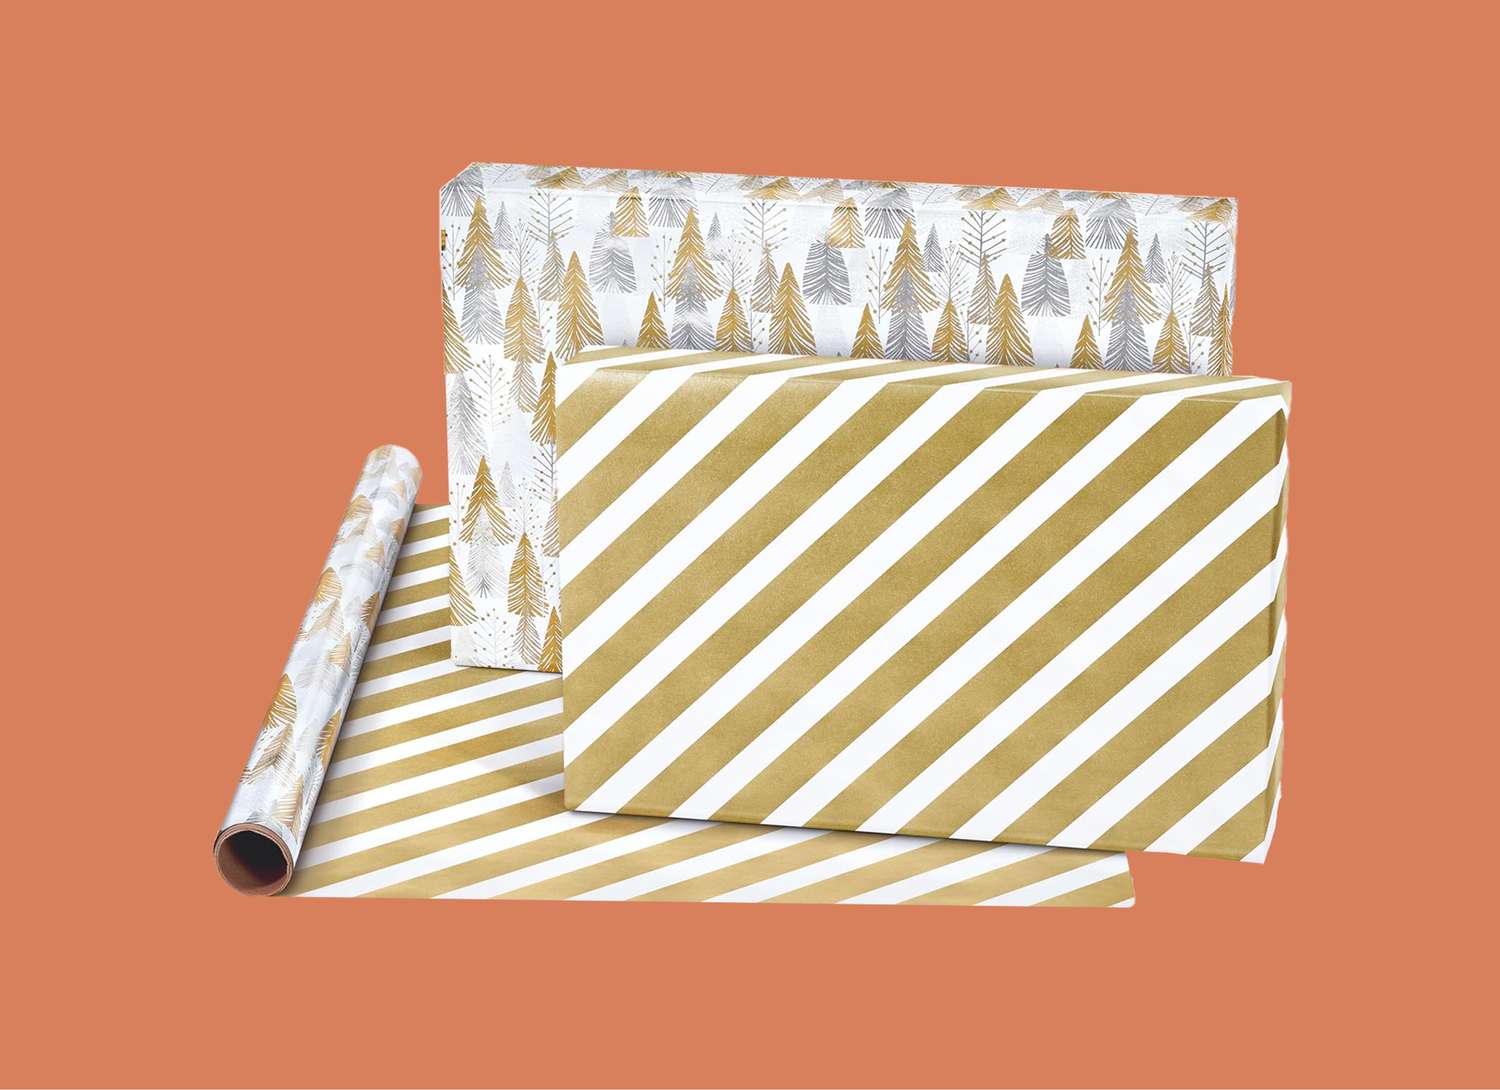 gold wrapping paper on an orange background